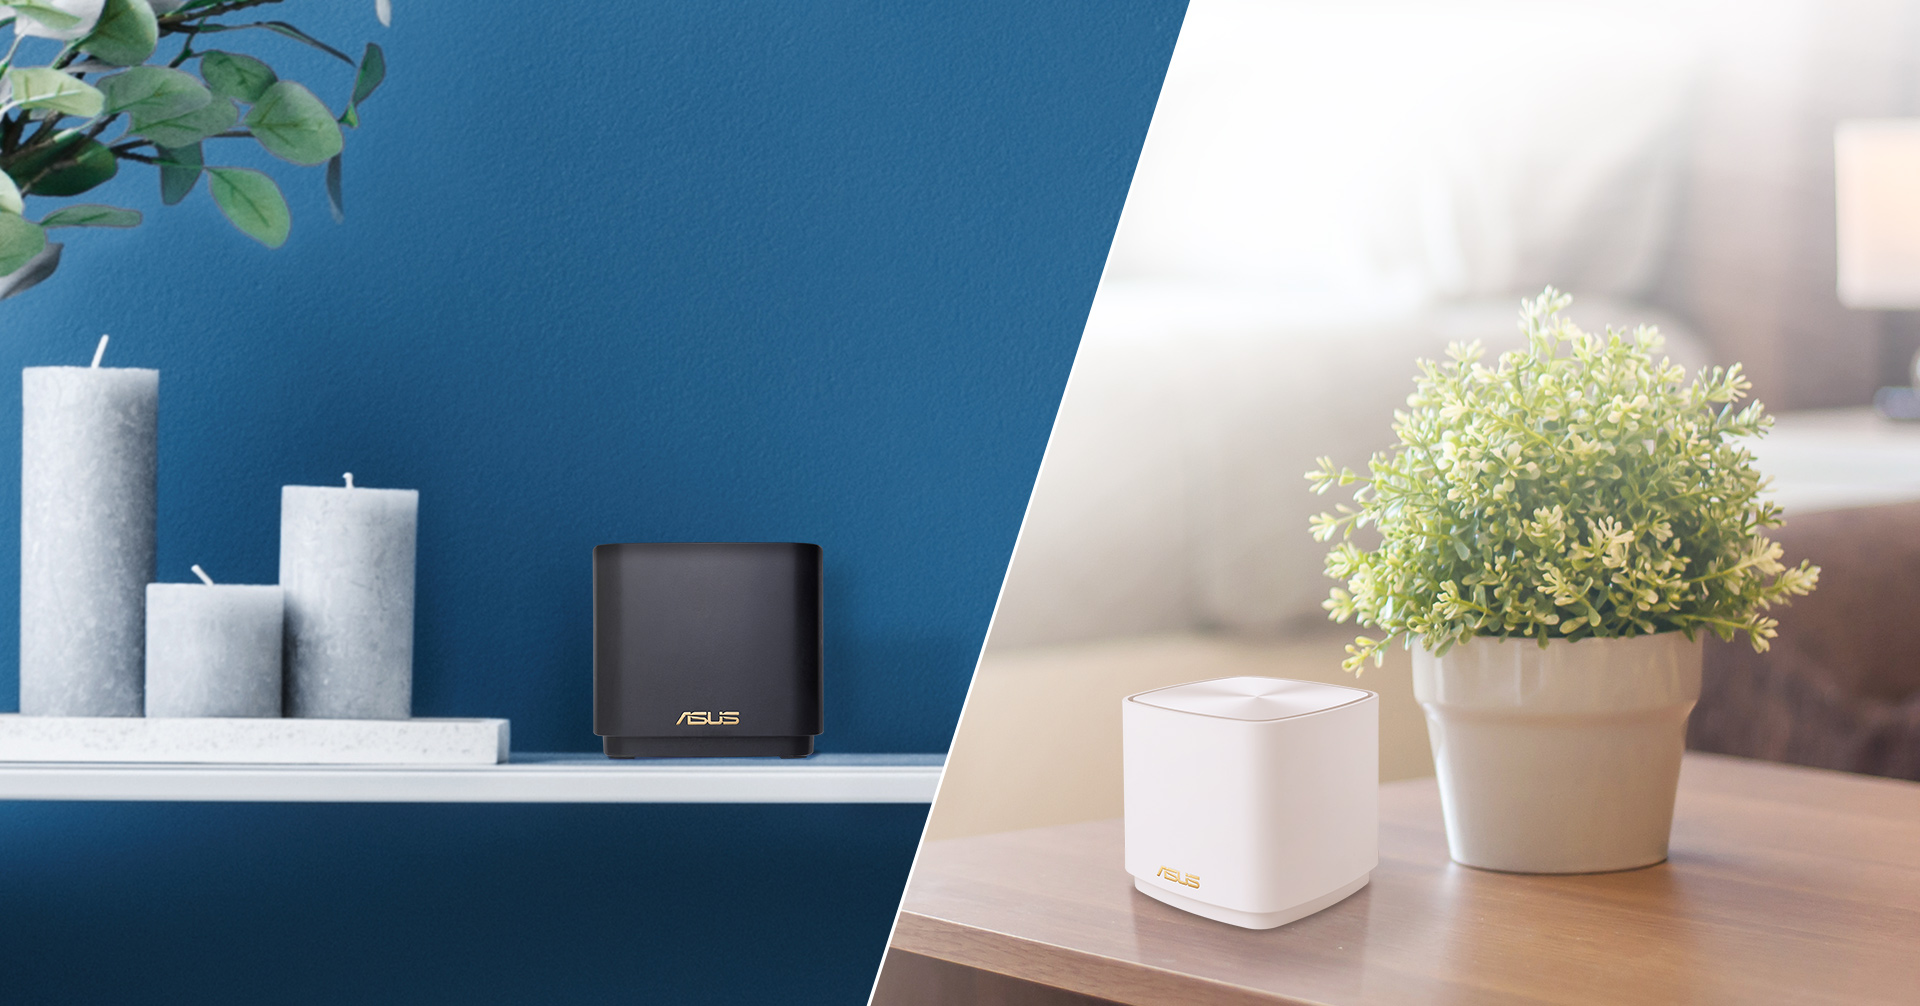 ZenWiFi is available in charcoal and white to fit any home interiore styles.